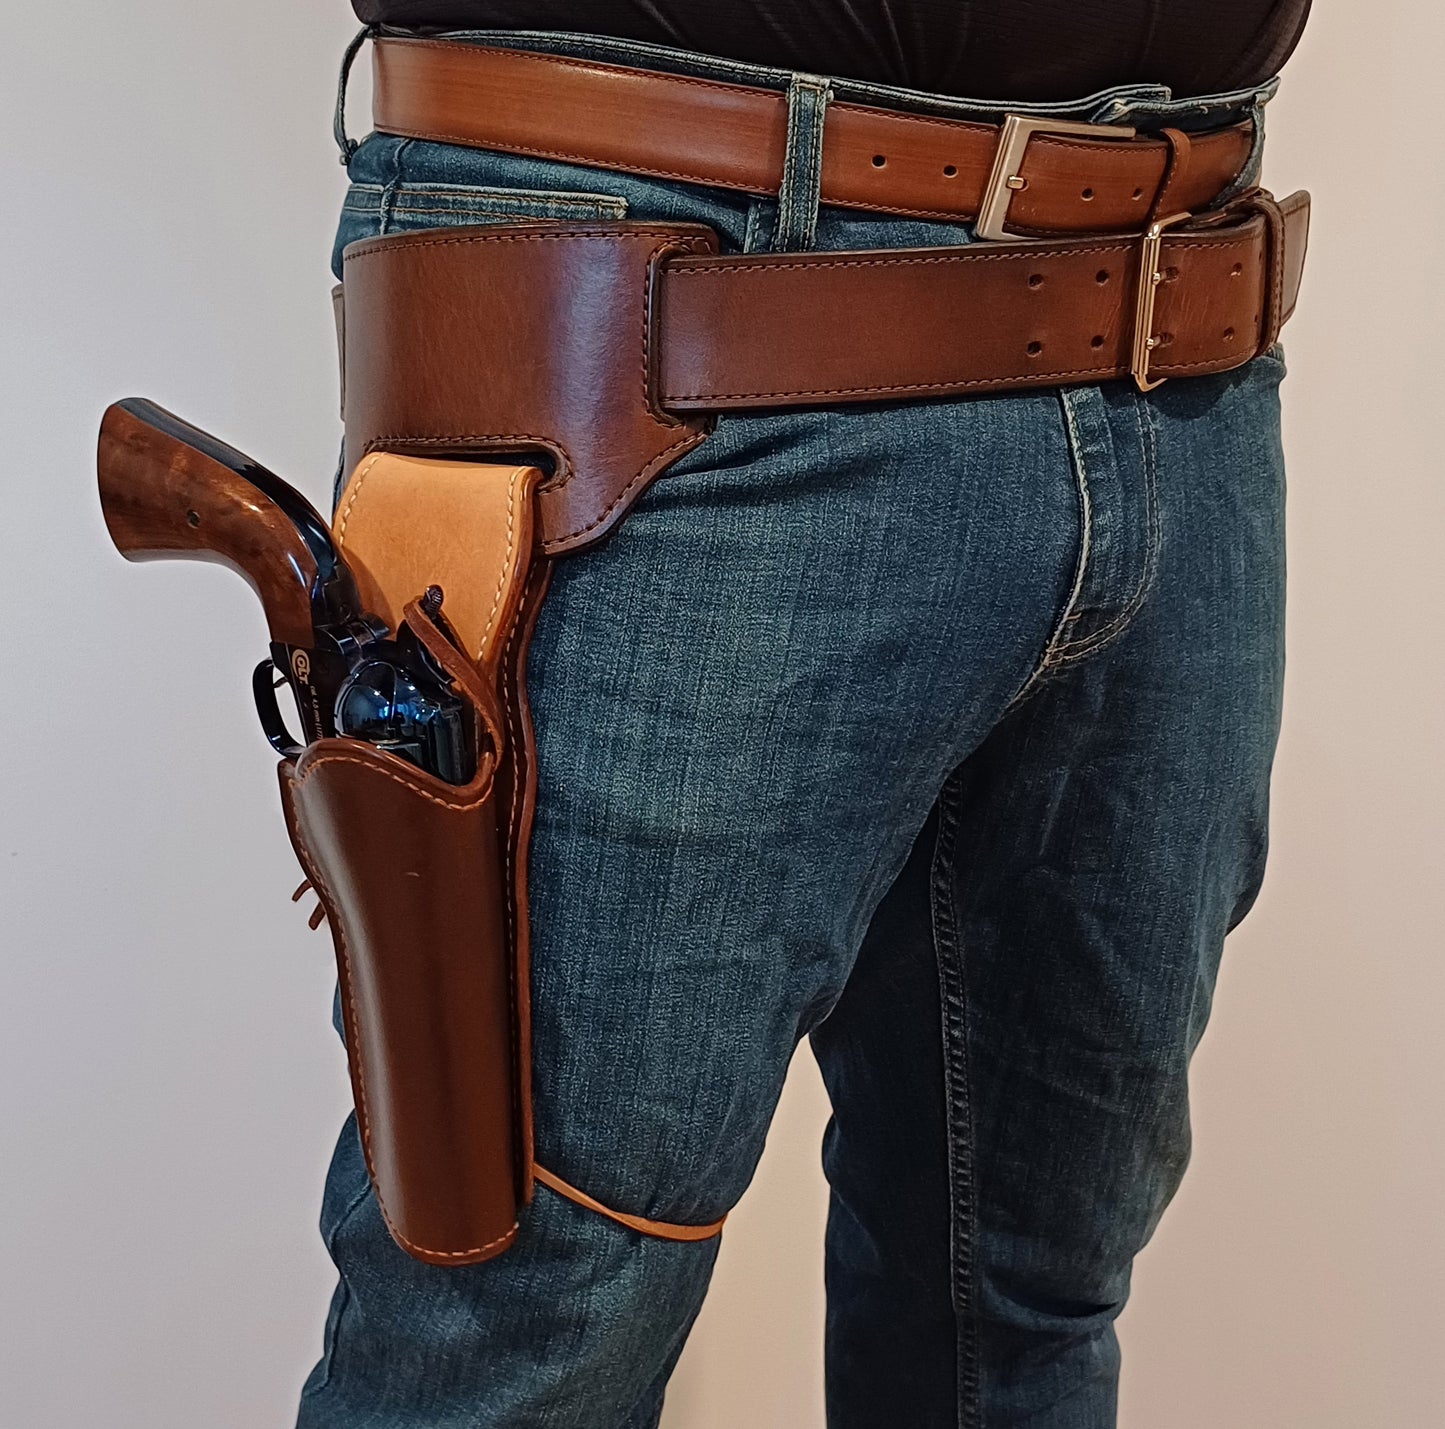 leather Gun Belt 2 inch width   (Made to order)